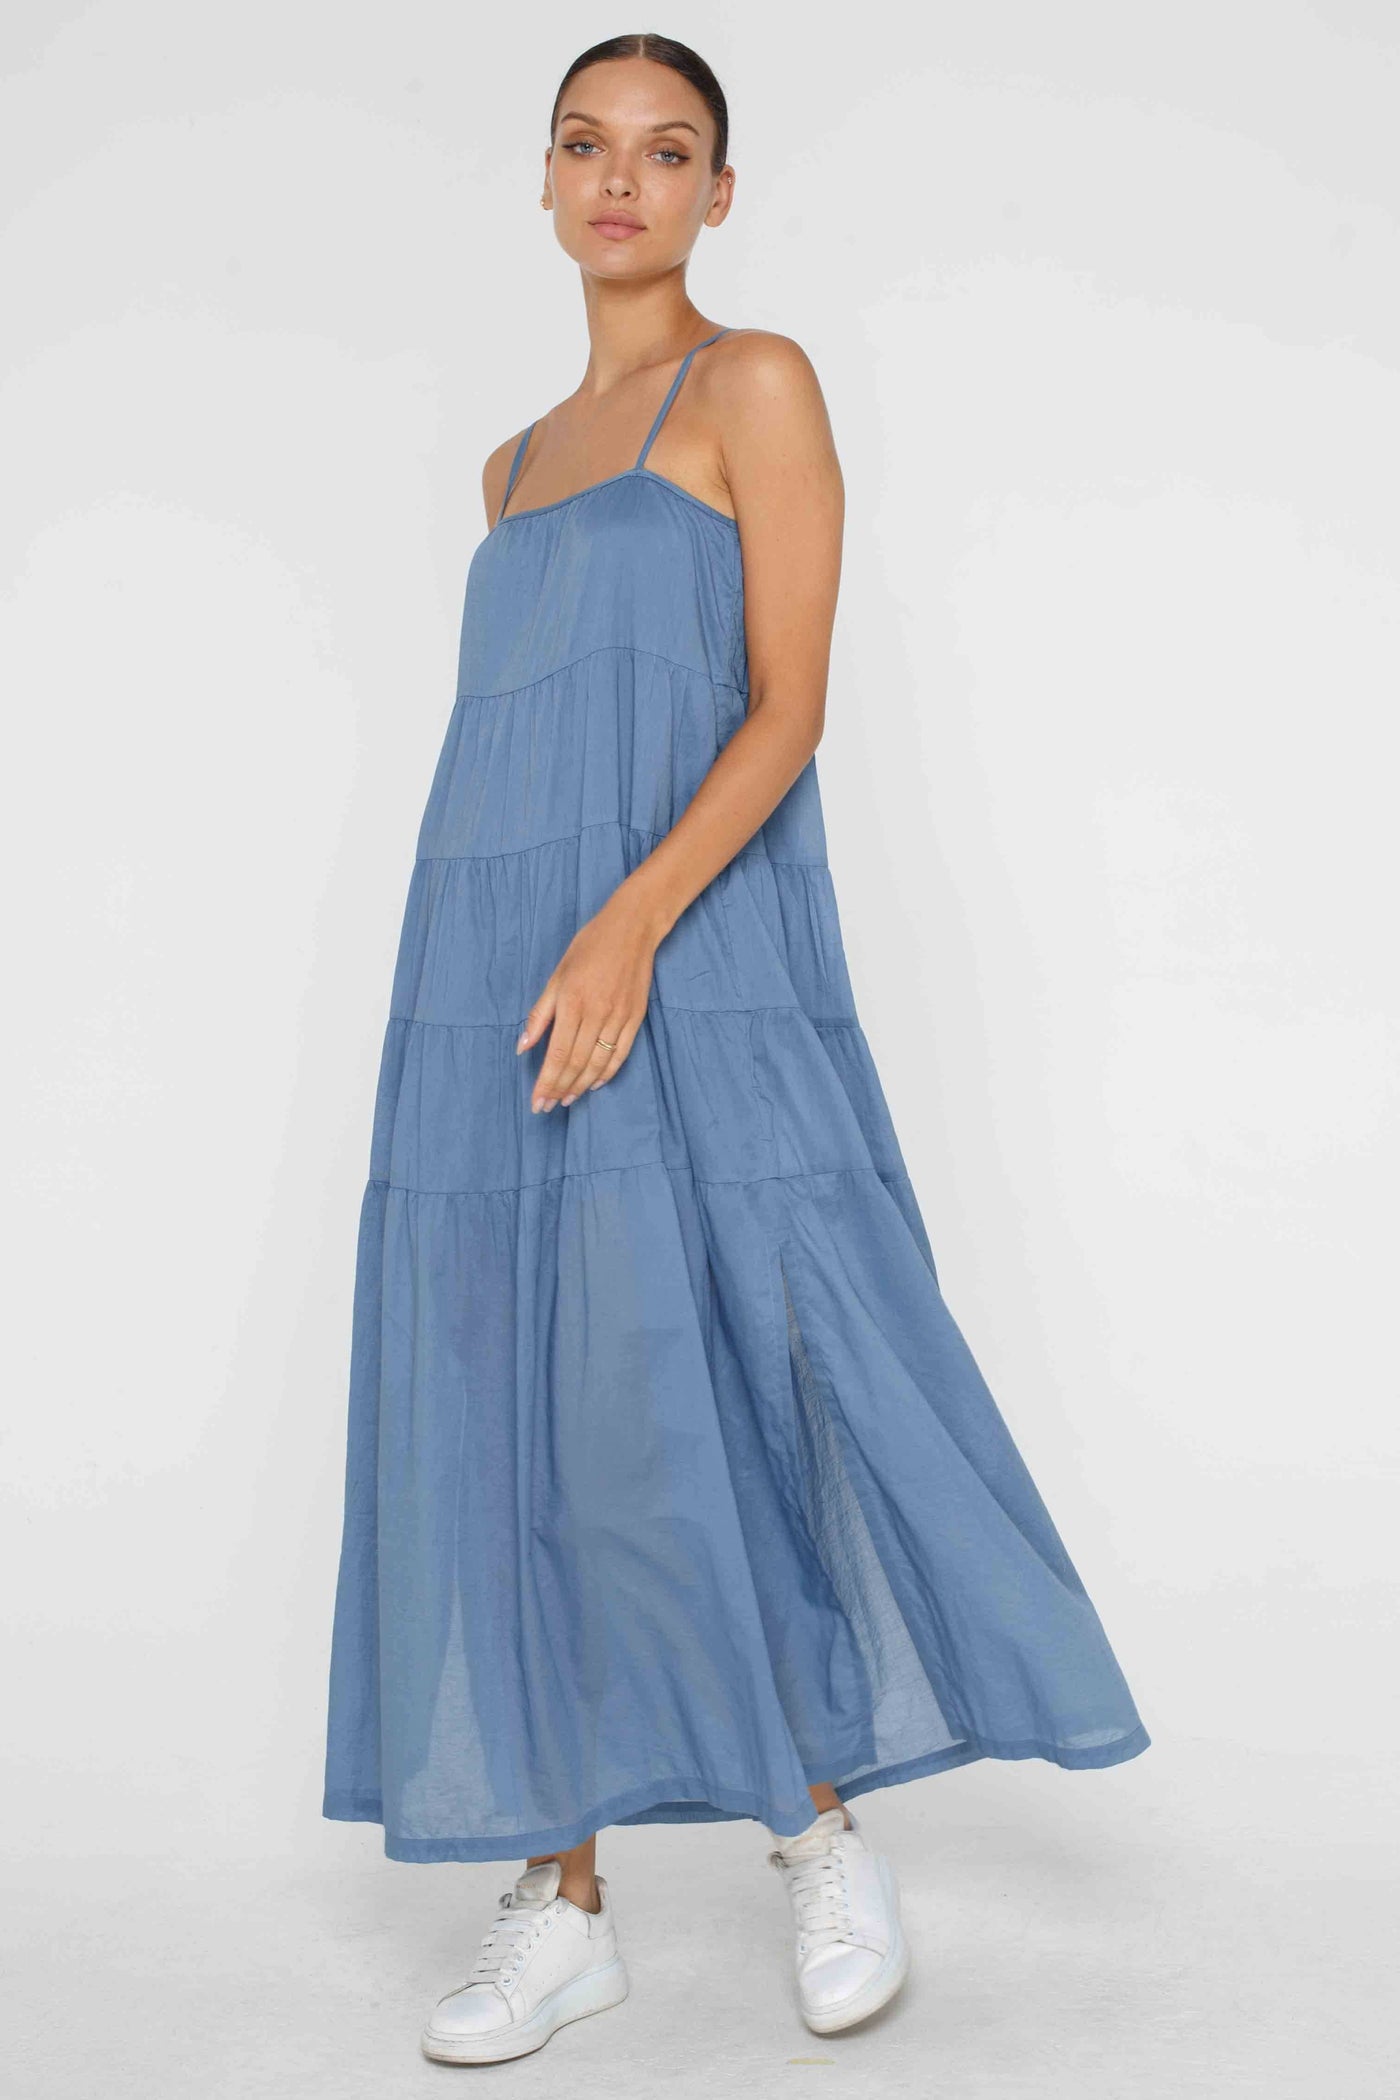 BLAK CARMEN DRESS - DENIM BLUE  The Blak Carmen Dress is a relaxed fitting maxi length now available in Denim Blue.  The Carmen Dress can easily be dressed up or down and looks great layered over a fitted tee. 